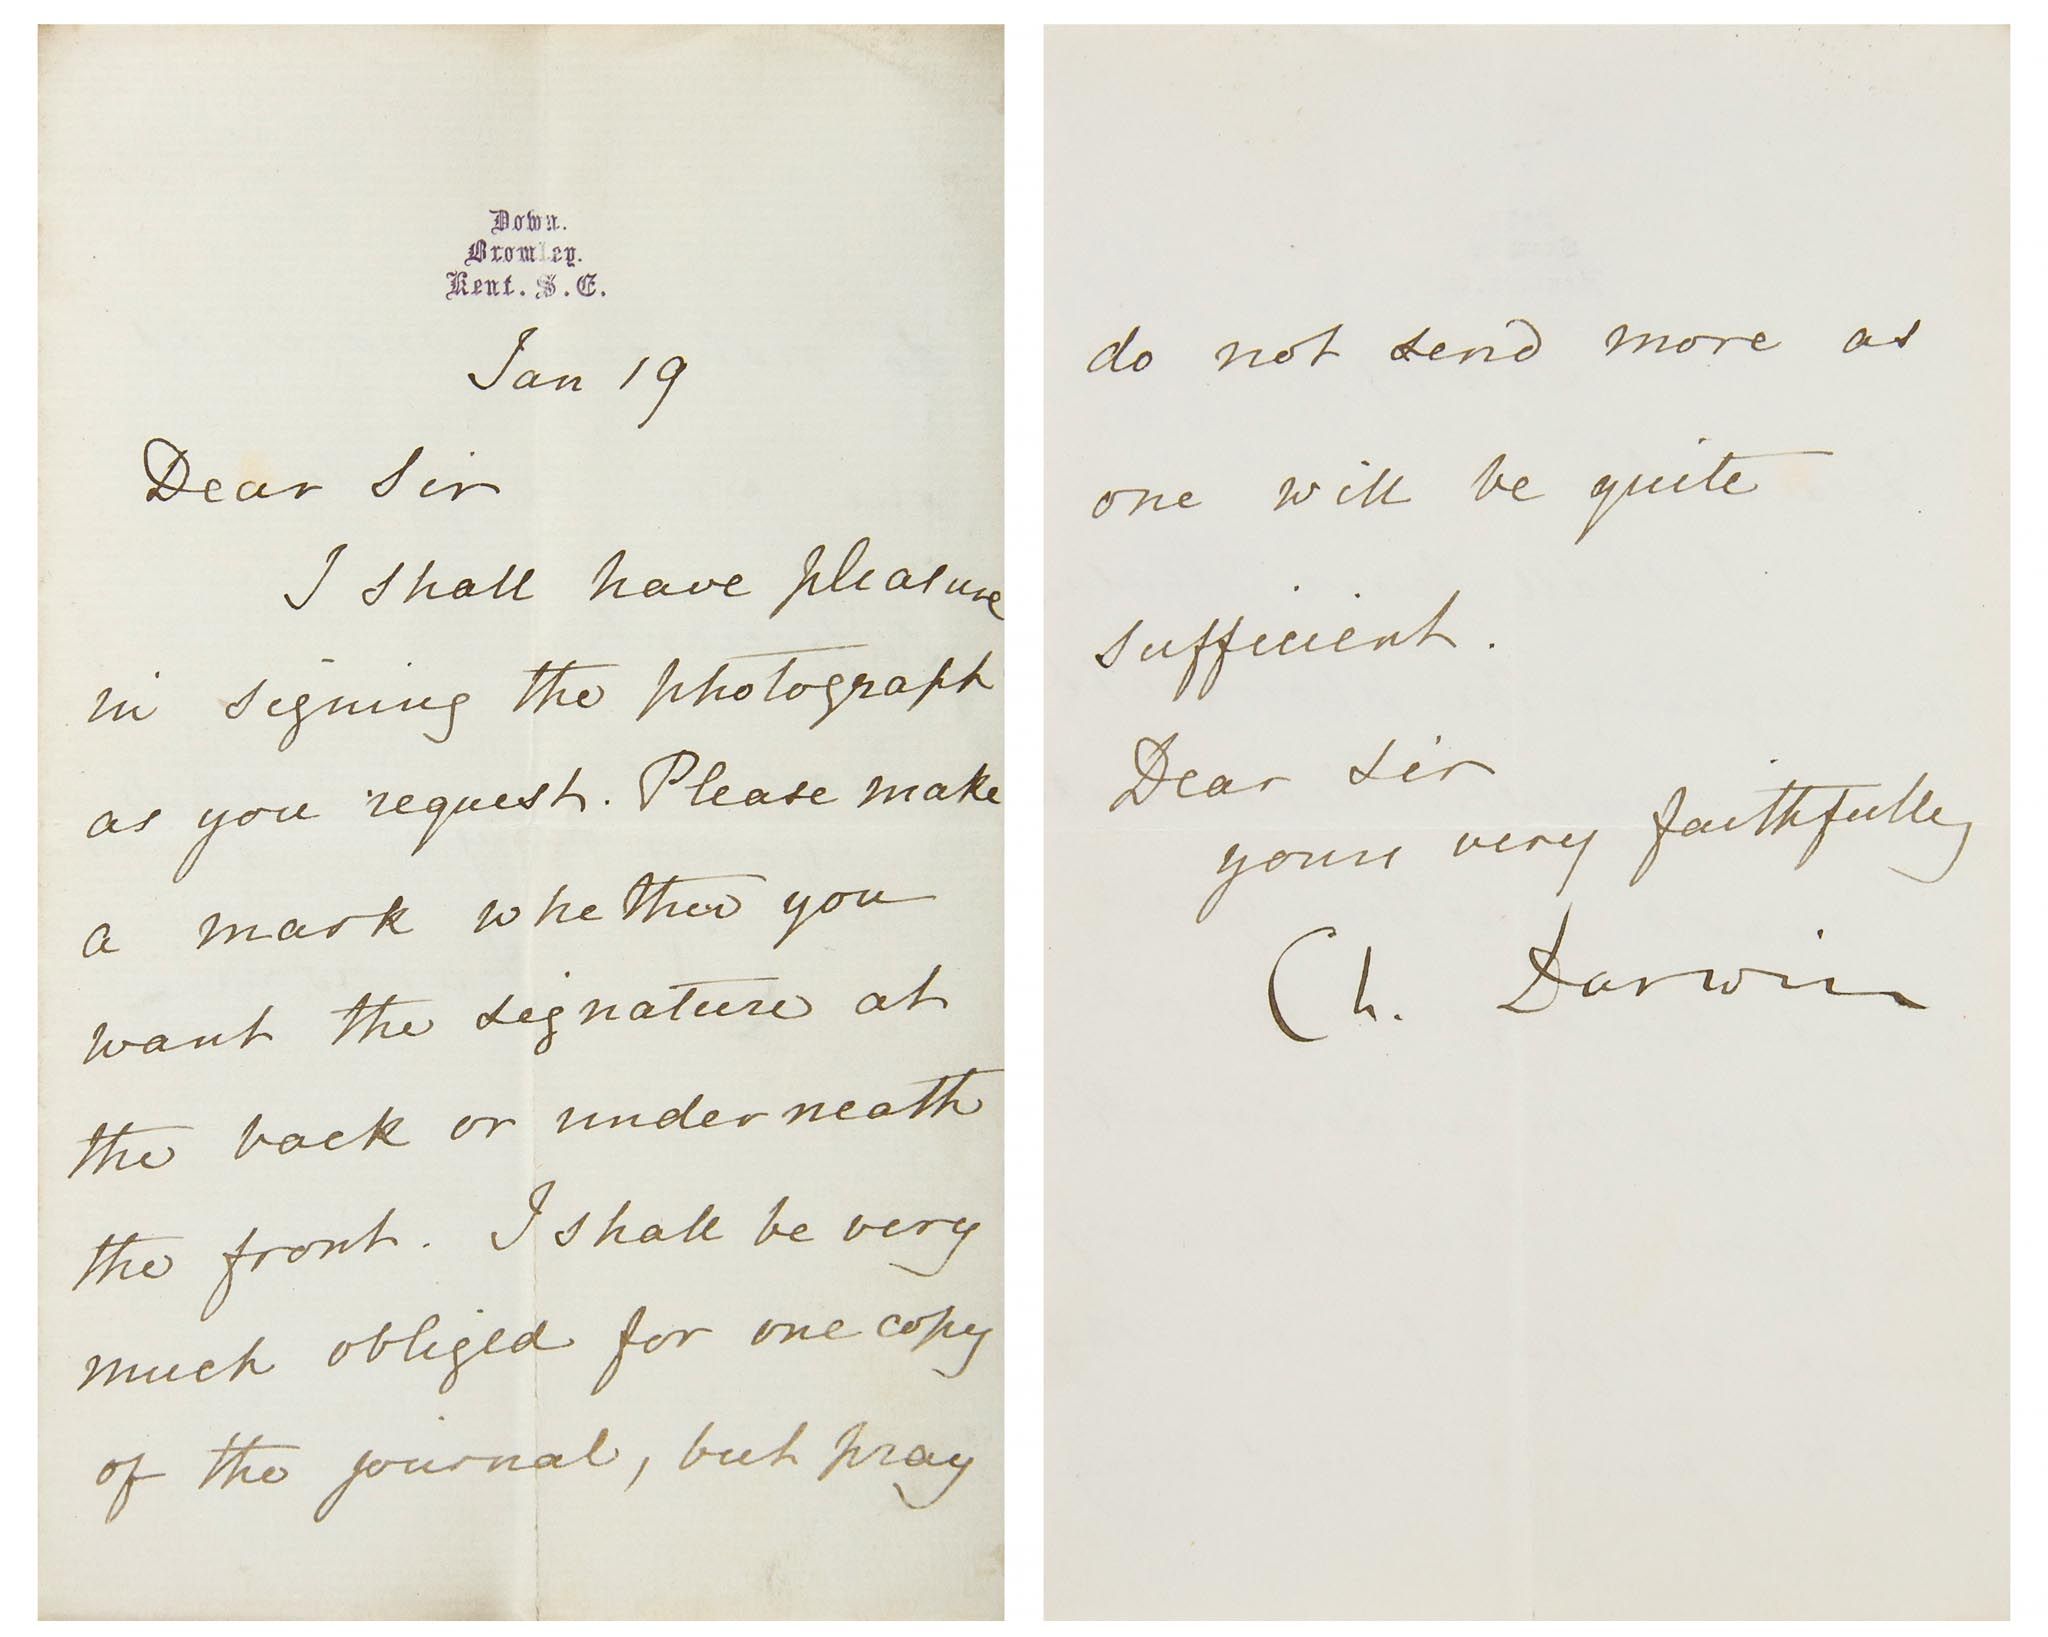 ALS A 18.1 x 11.2 cm letter from Charles Darwin ALS A 18.1 x 11.2 cm letter from Charles Darwin.